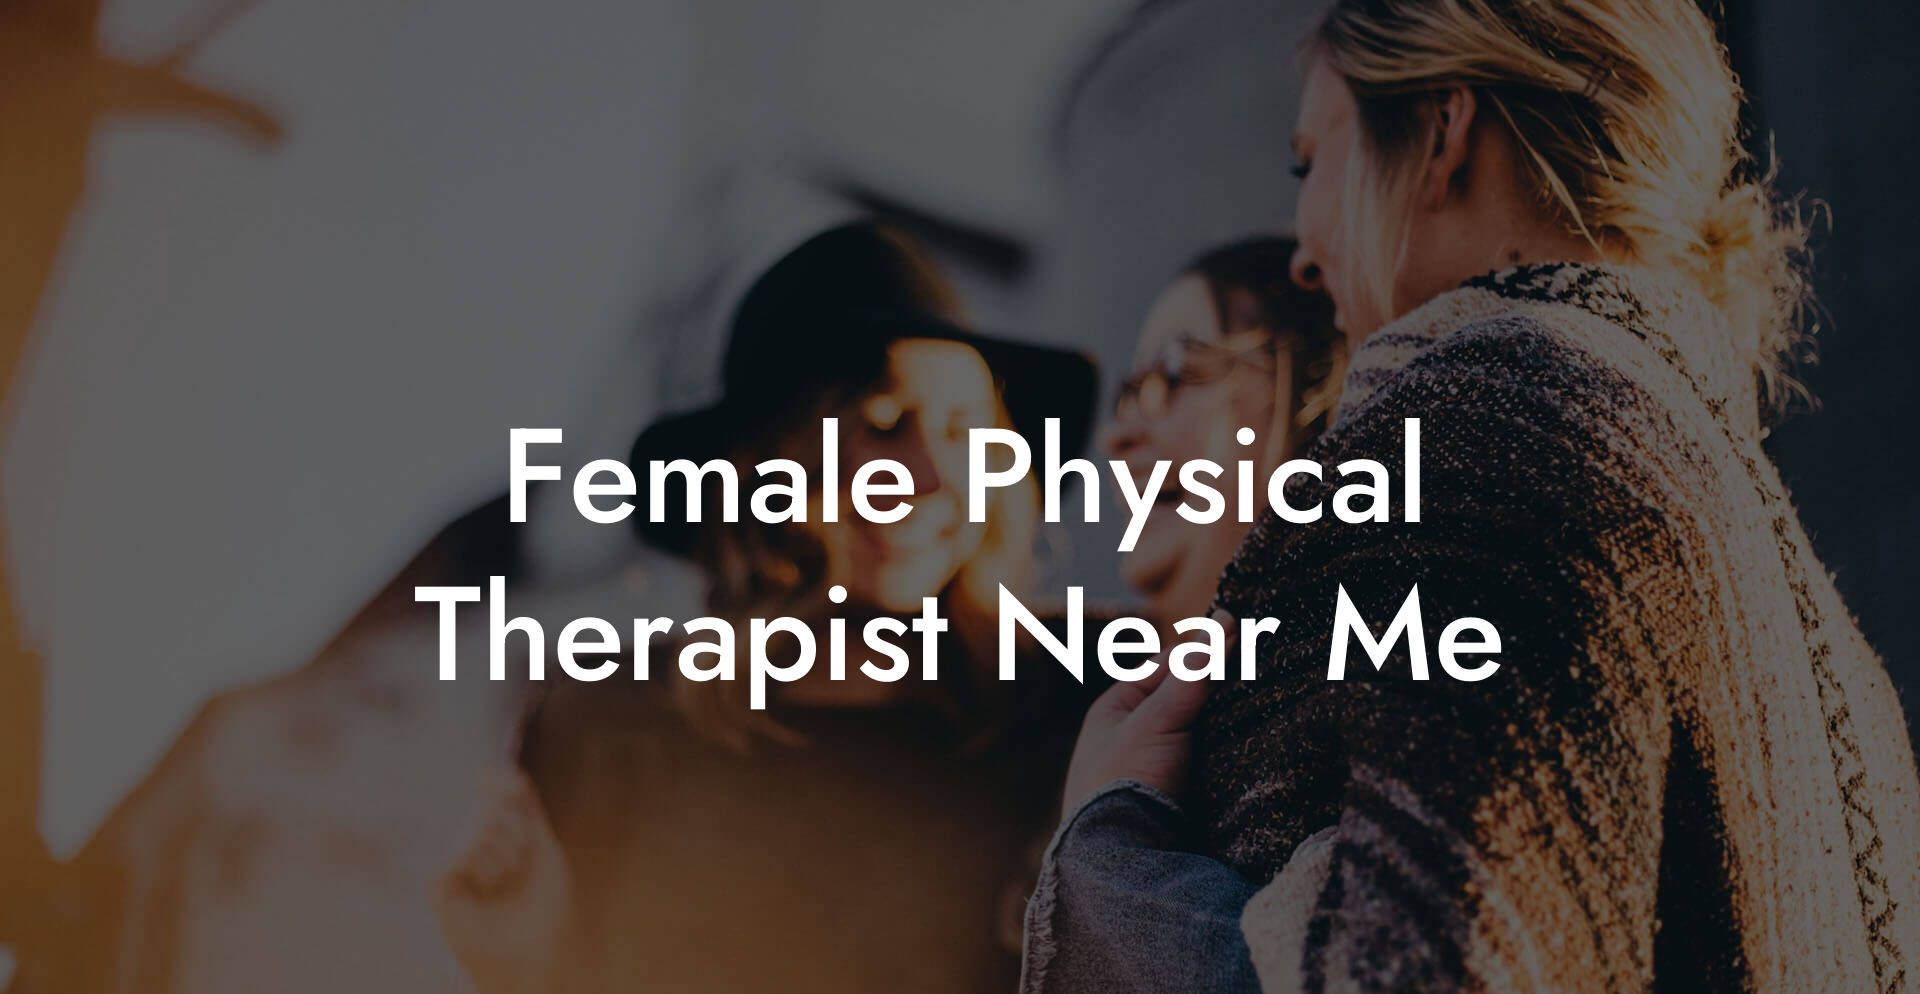 Female Physical Therapist Near Me